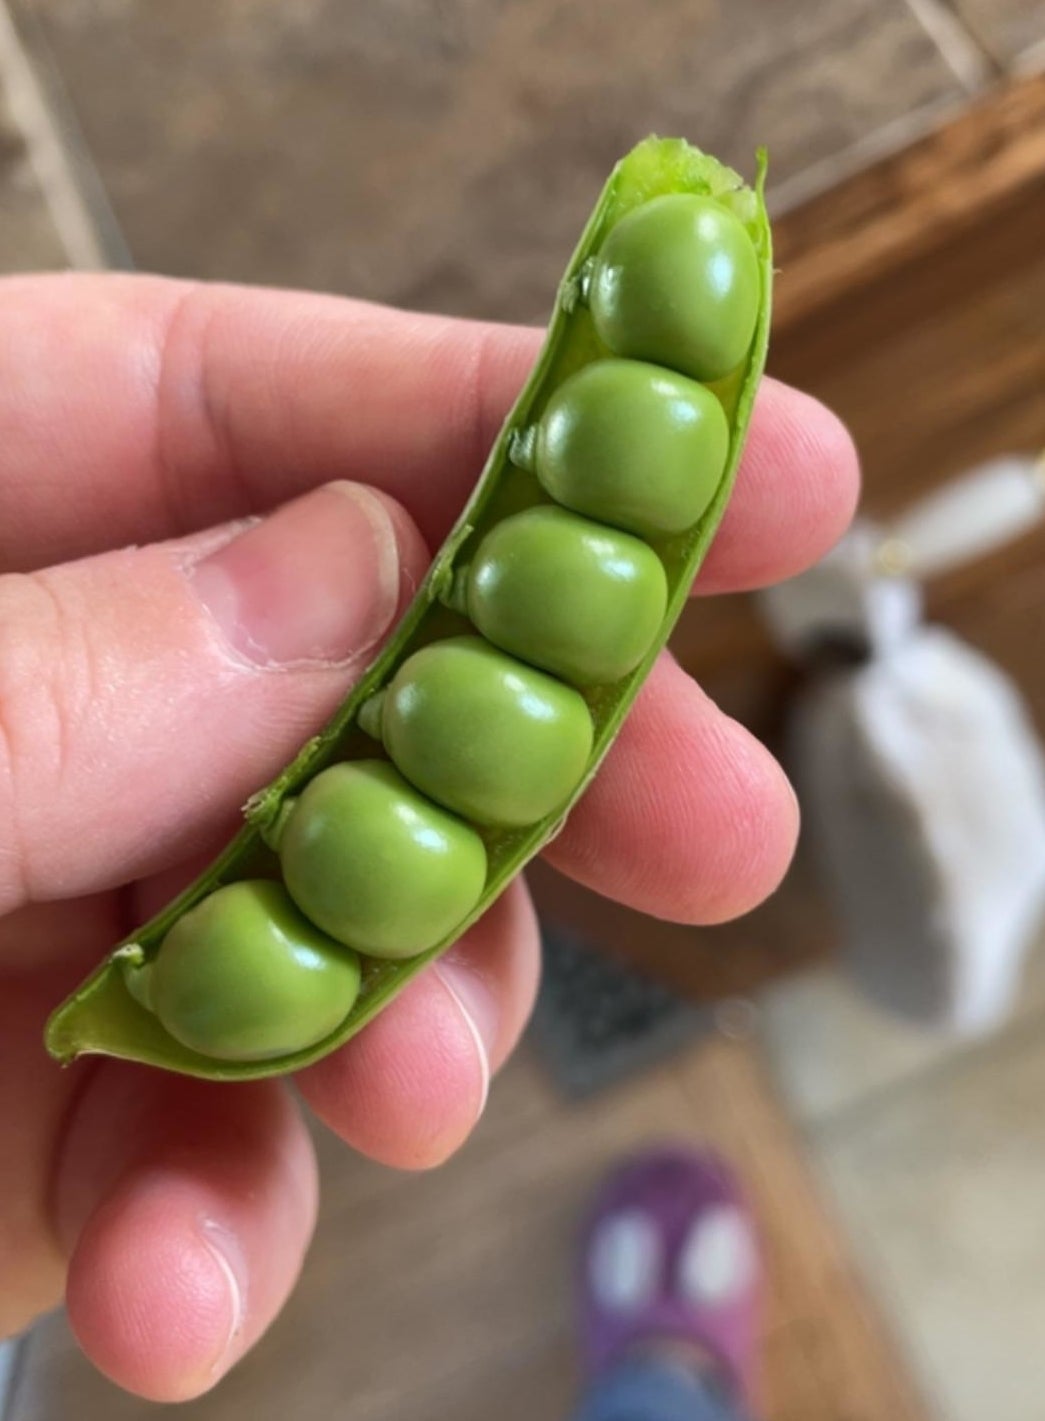 Someone holding some peas